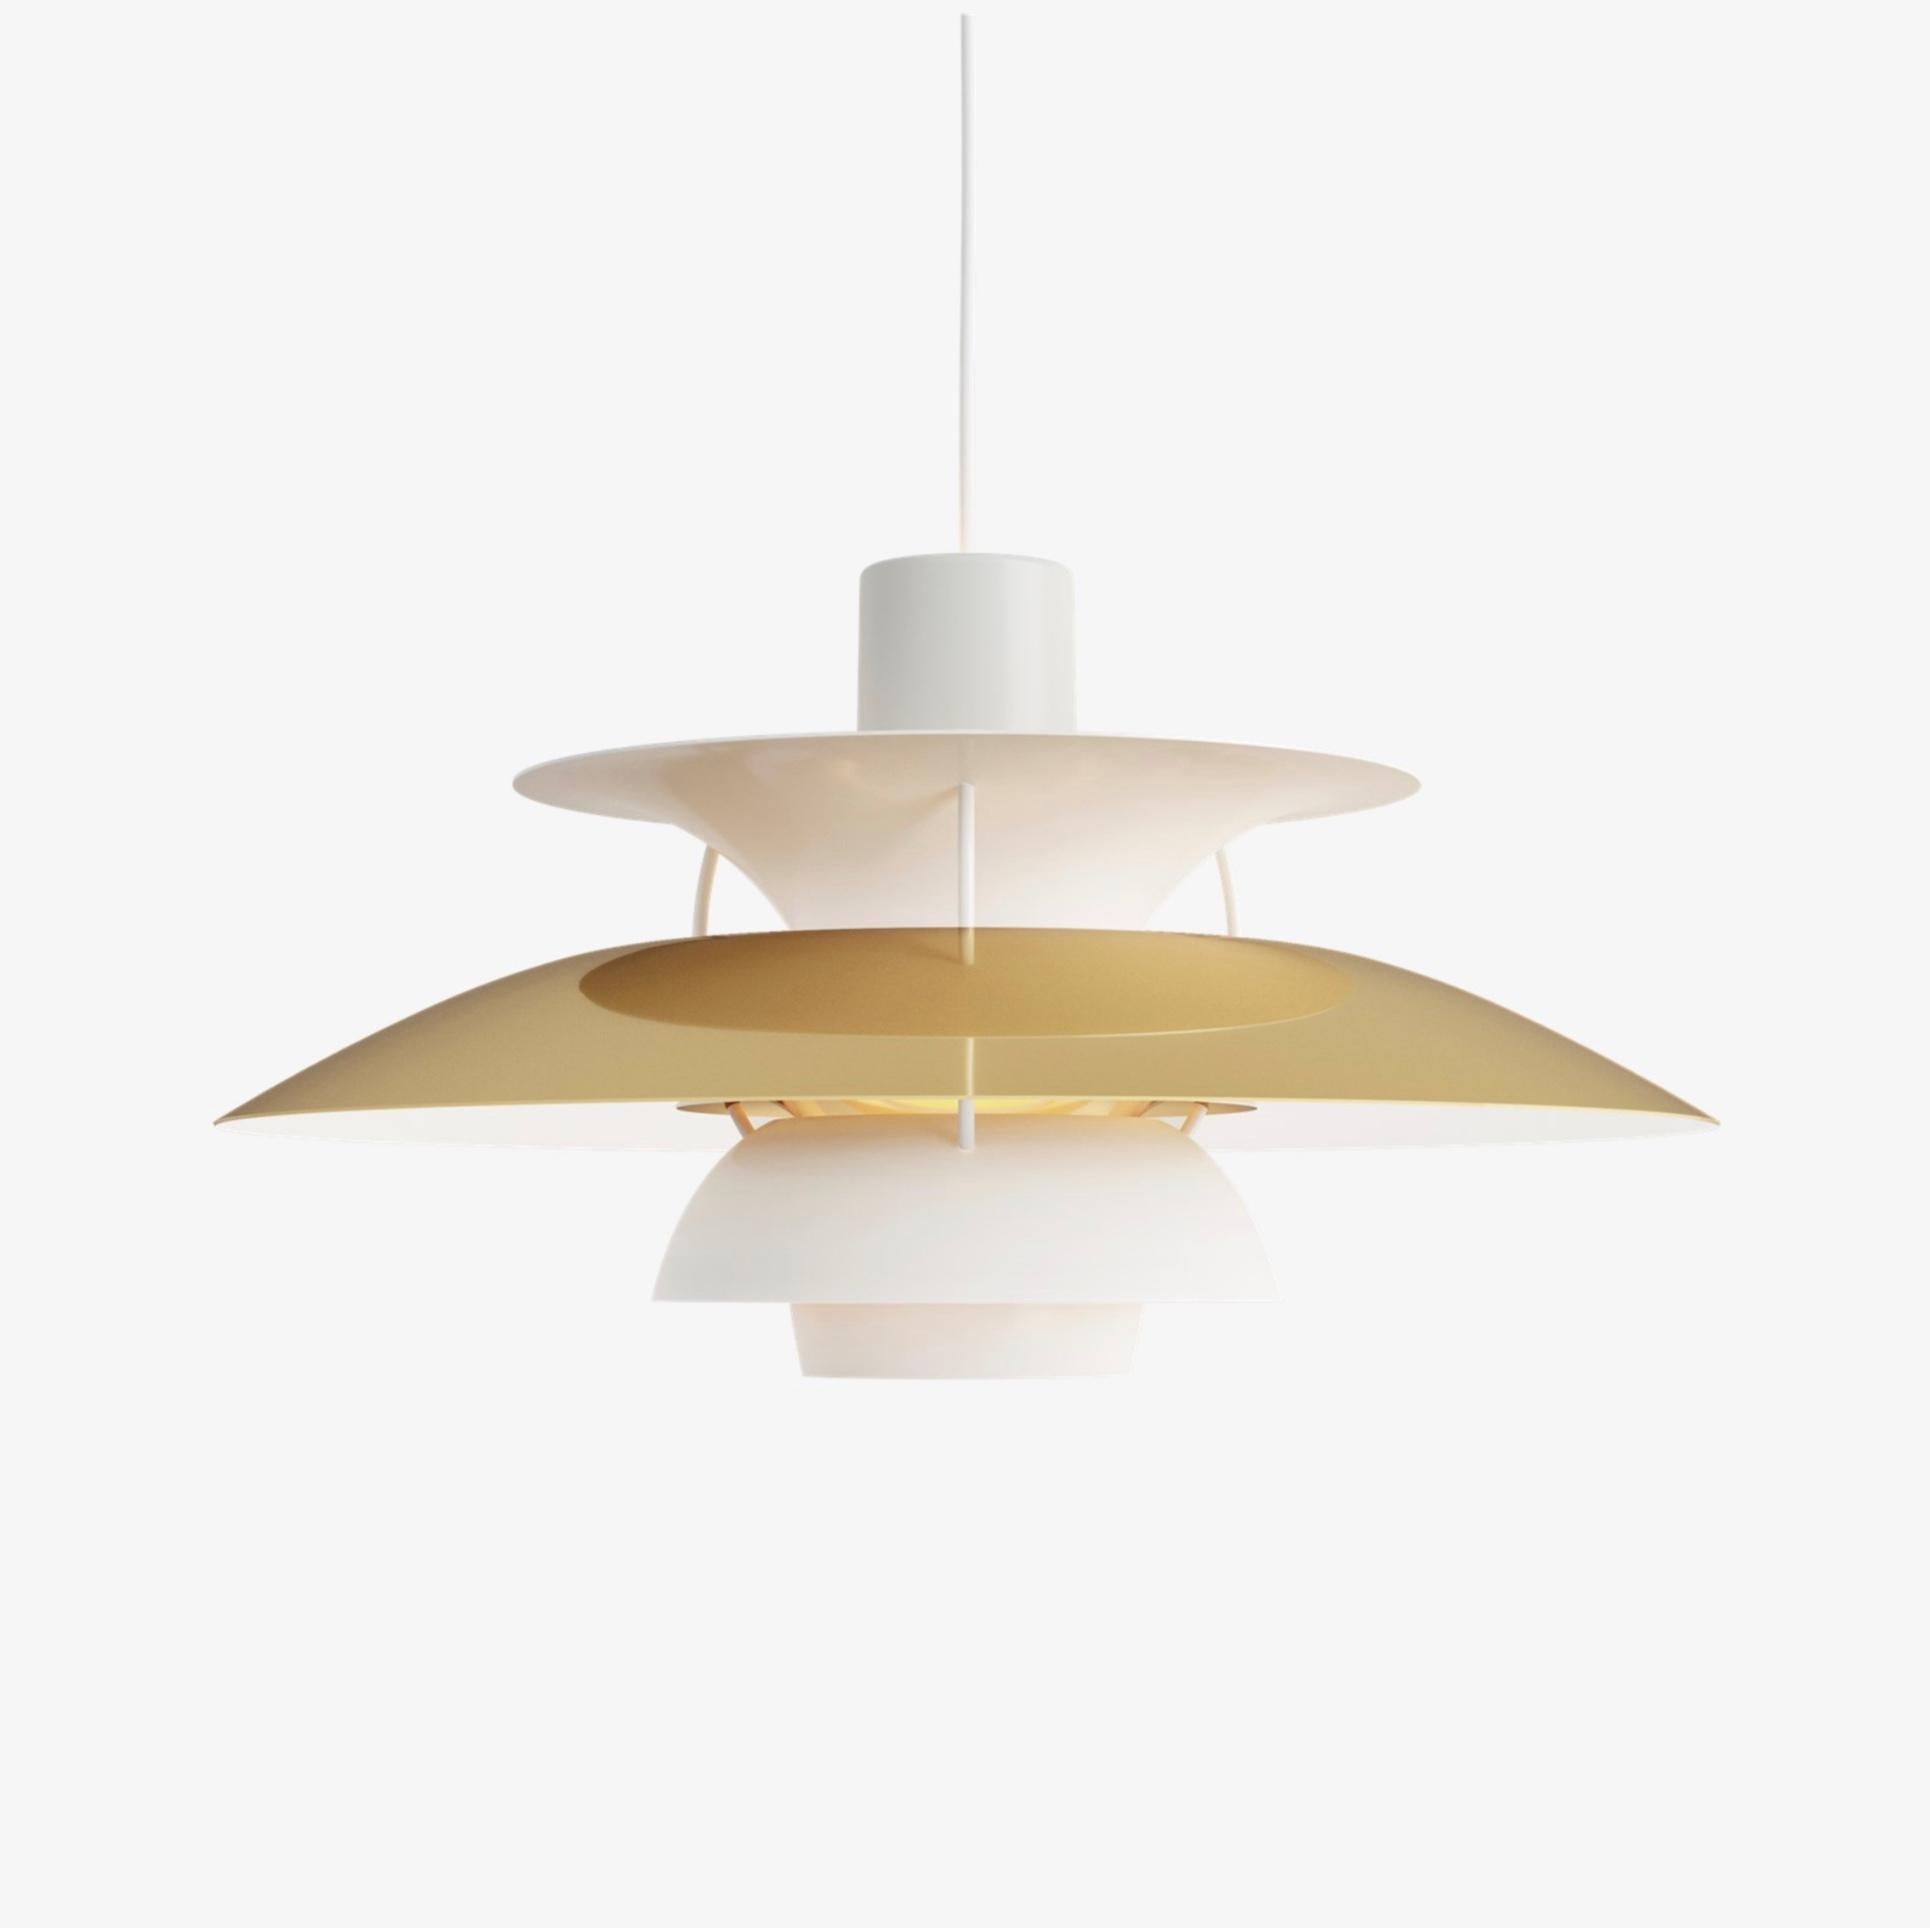 Poul Henningsen PH5 Pendant for Louis Poulsen. Denmark. Designed in 1958. New, current production.

Poul Henningsen developed the PH 5 in 1958 in response to constant changes made to the shape and size of incandescent bulbs by bulb manufacturers,